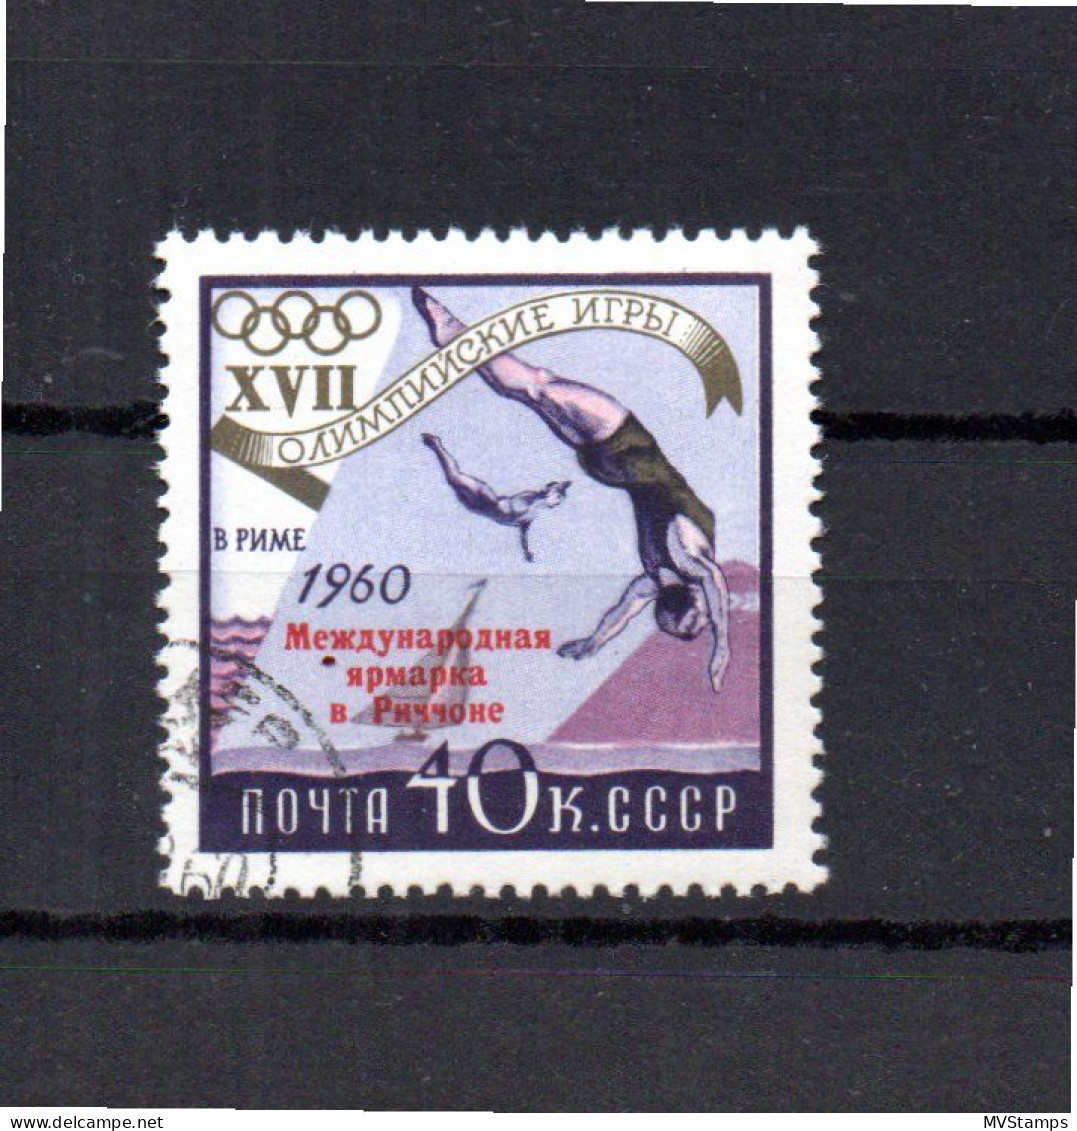 Russia 1960 Overprinted Olympics/Sports Stamp  (Michel 2379) Nice Used - Oblitérés